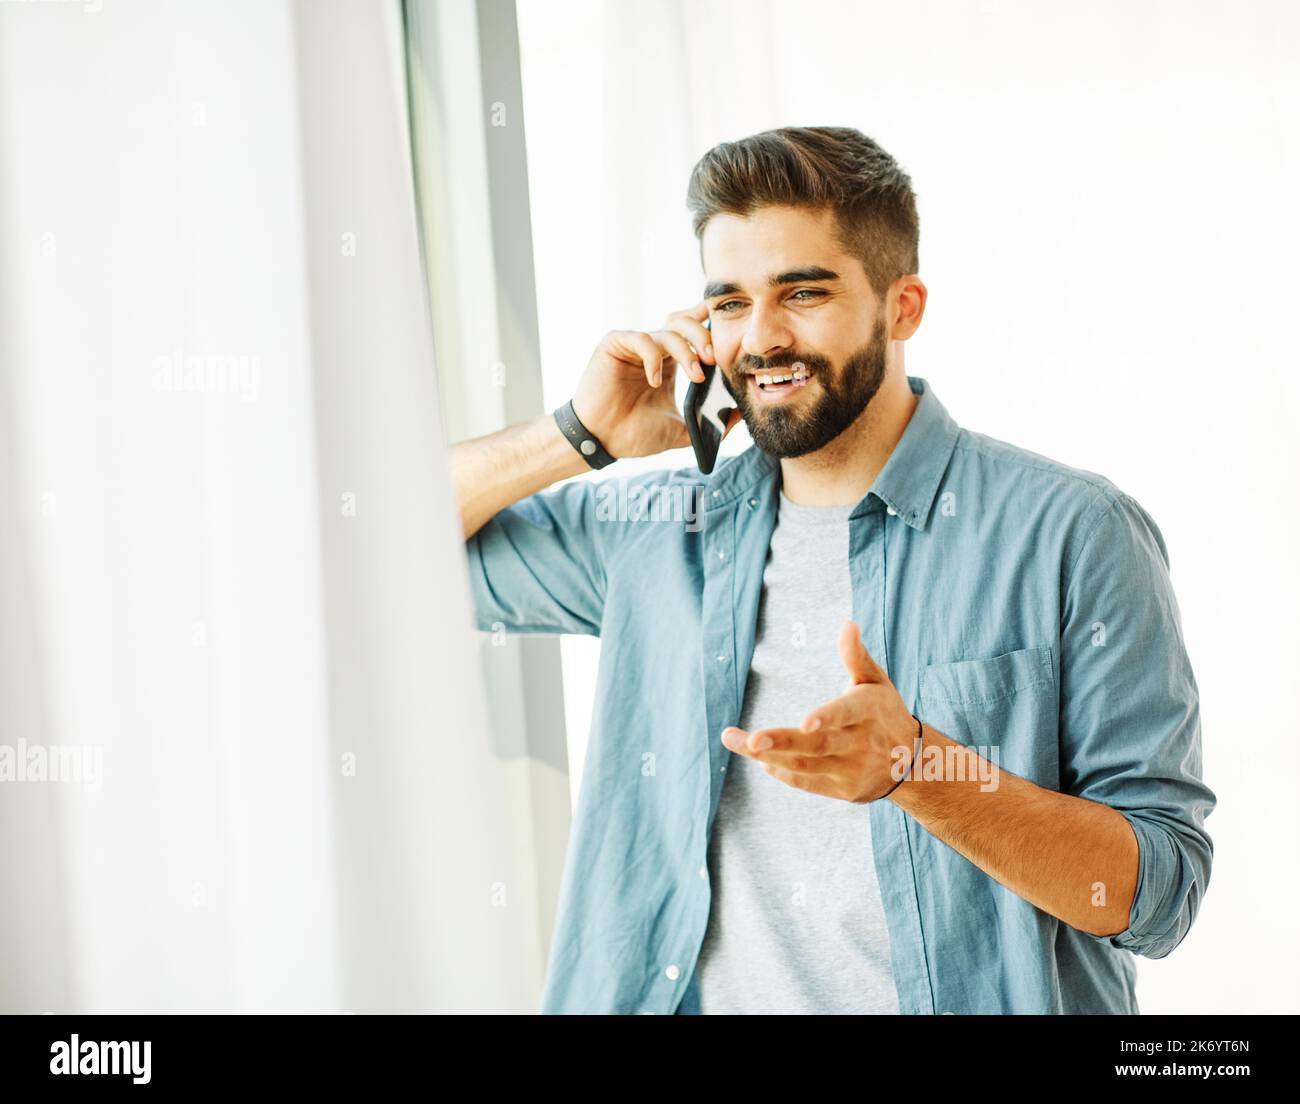 portrait man phone smartphone cell mobile using model male young happy lifestyle handsome smiling shirt casual Stock Photo